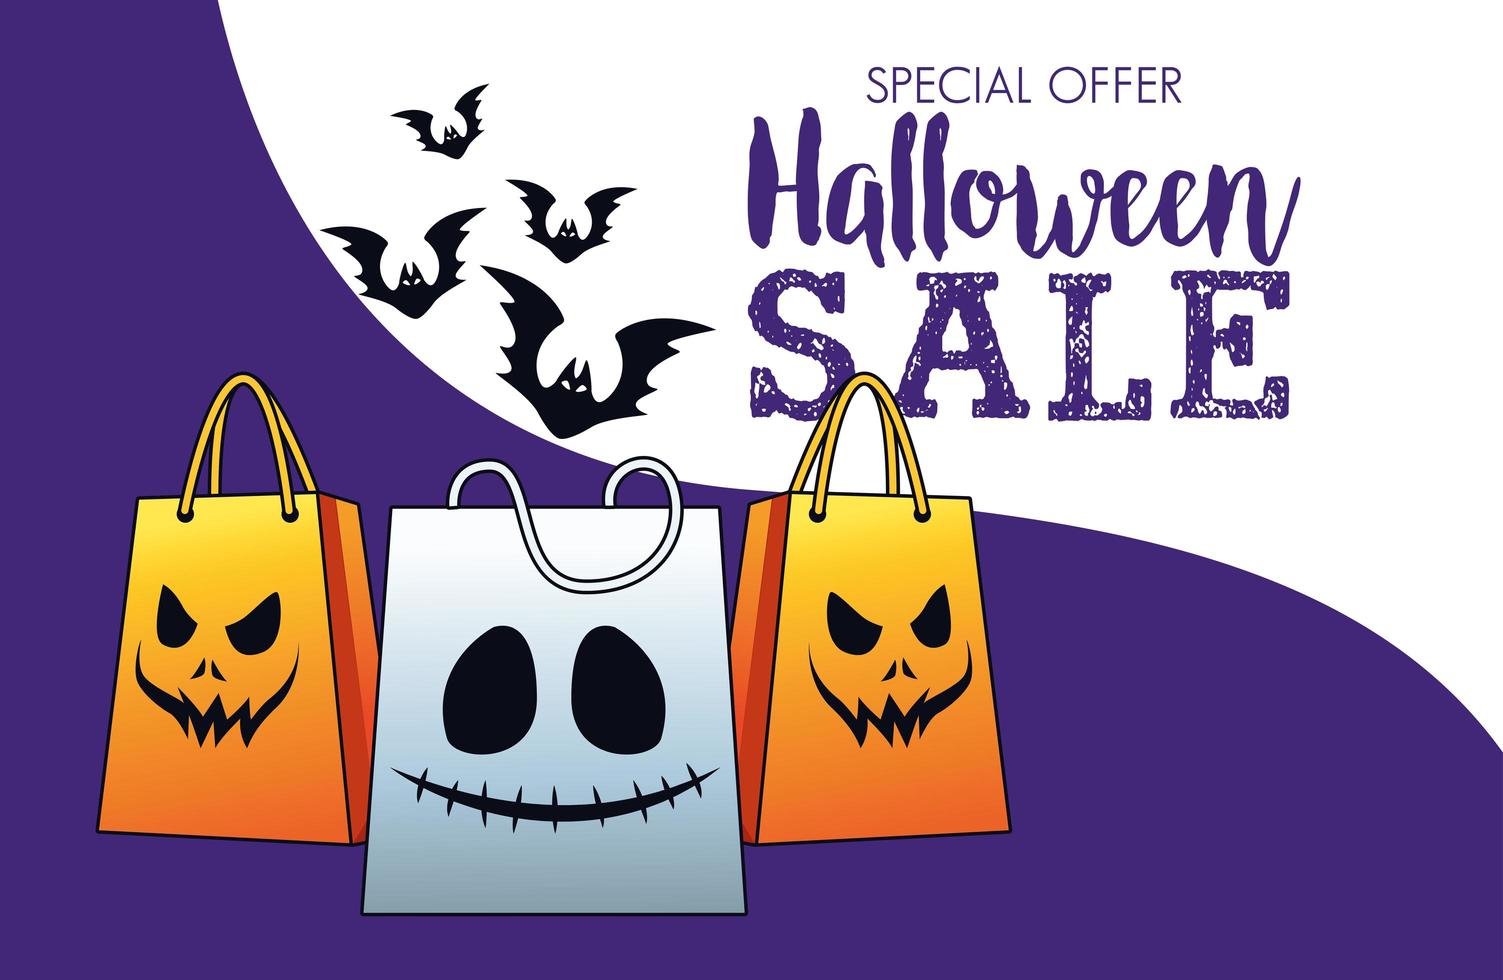 halloween sale seasonal poster with shopping bags and bats flying vector